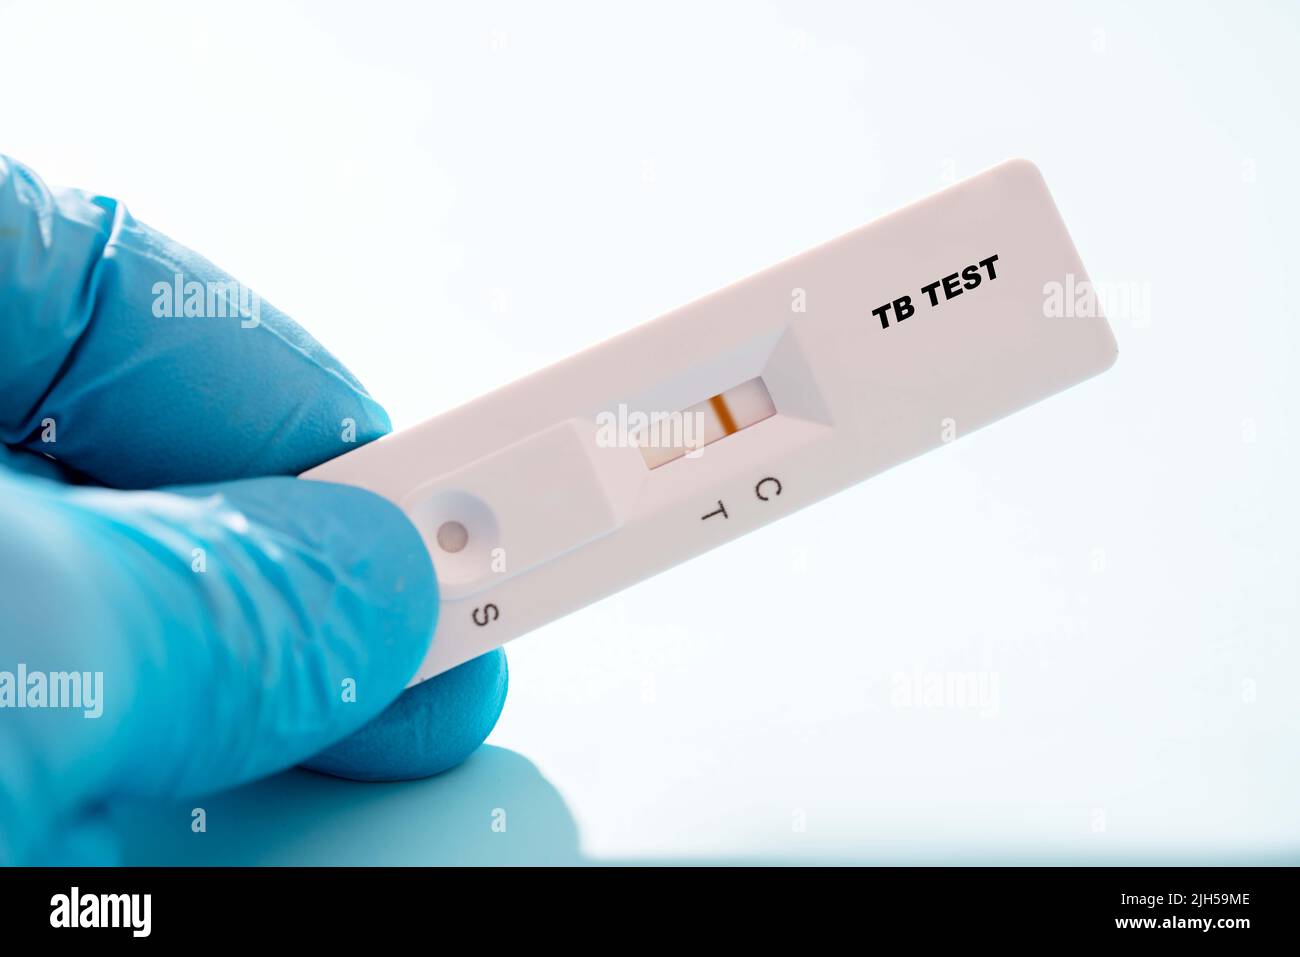 Tb Test  Rapid Test Cassette in doctor hand Stock Photo